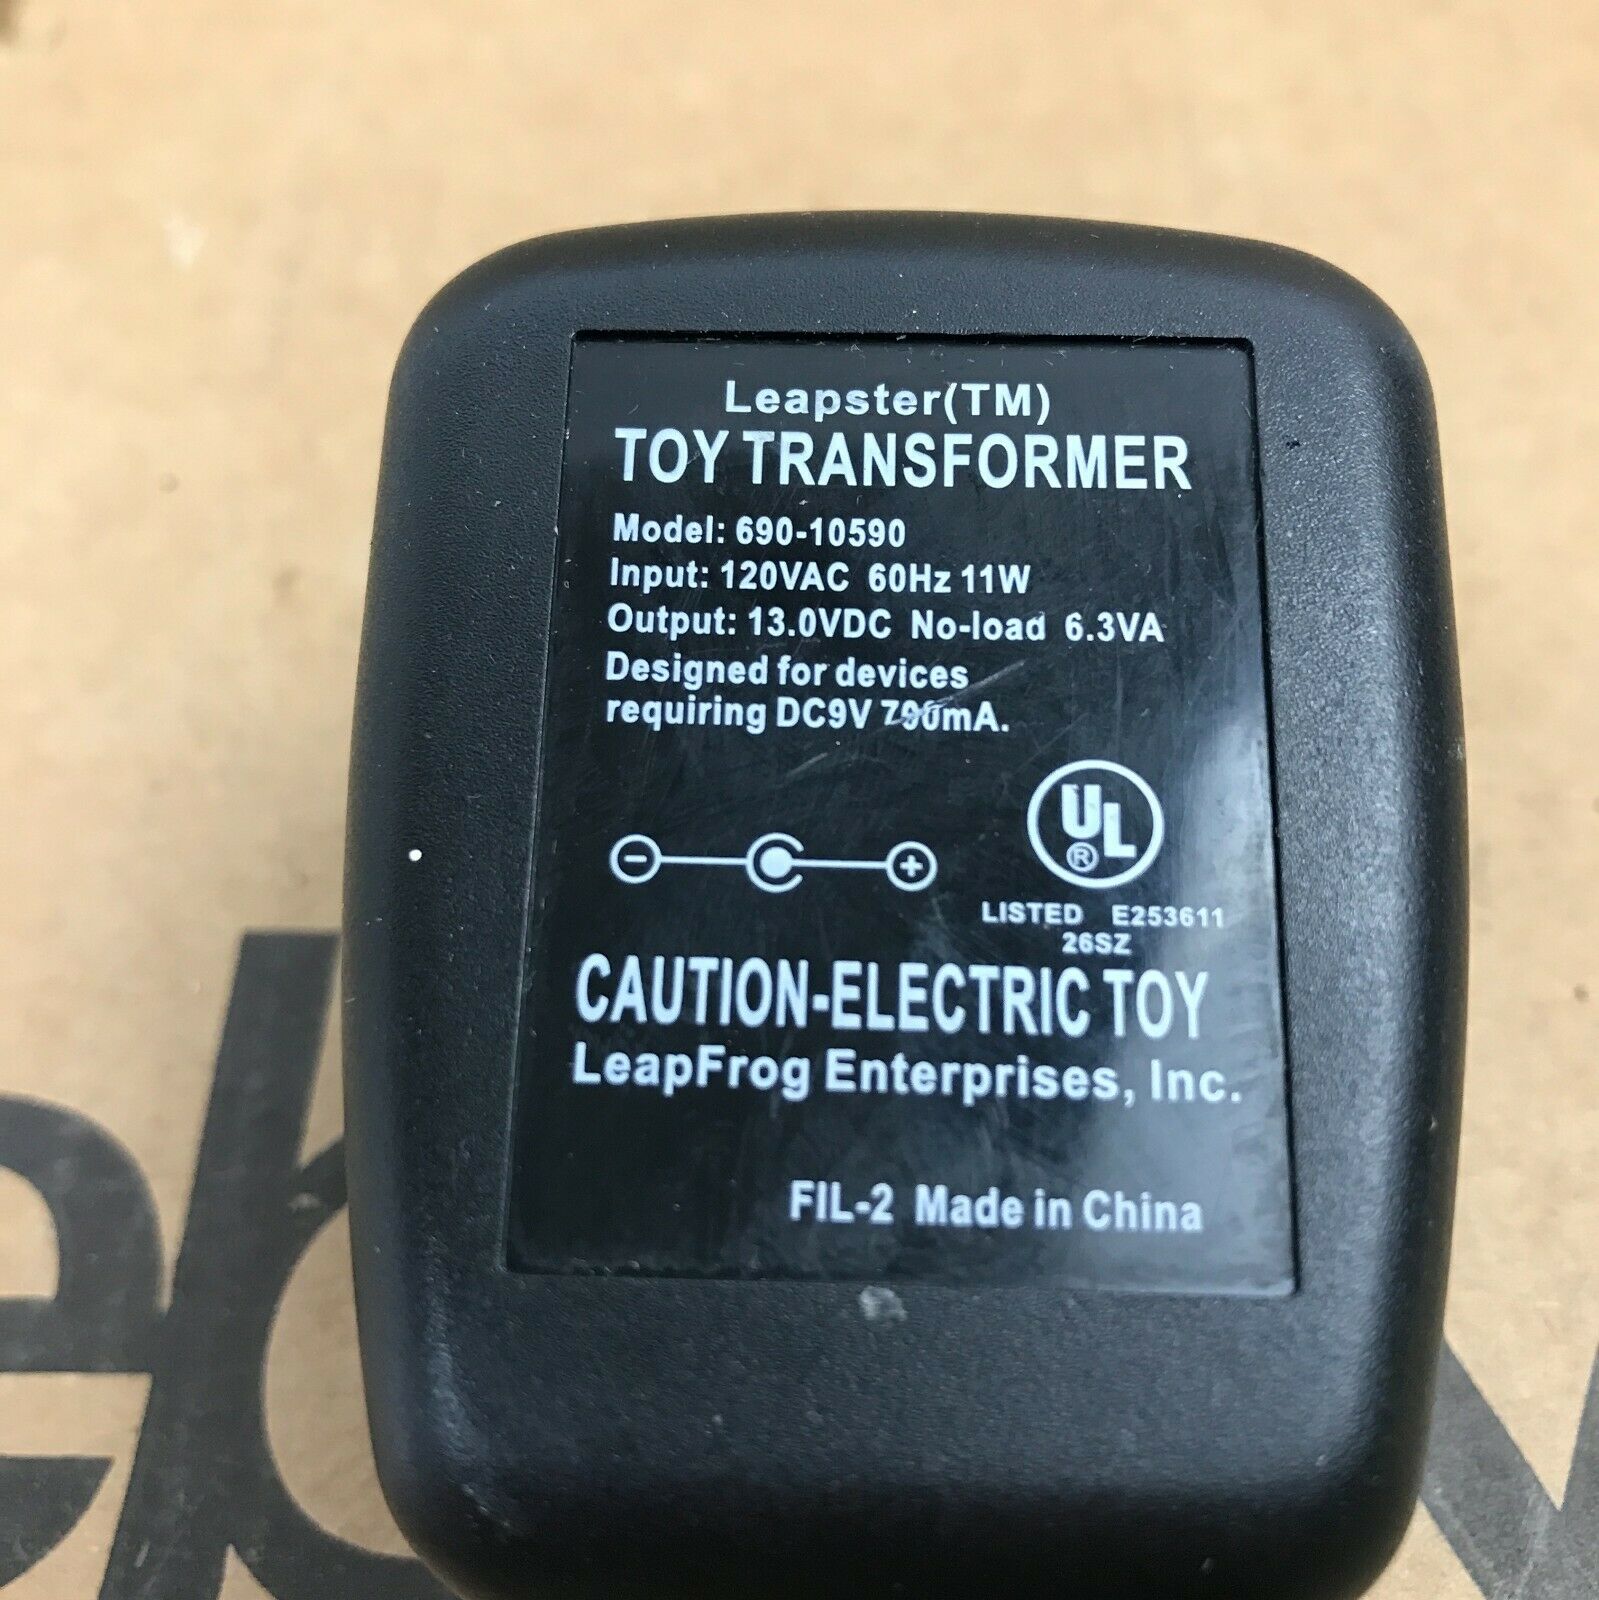 Genuine Leapster Model 690-10590 AC Wall Power Adapter Cord